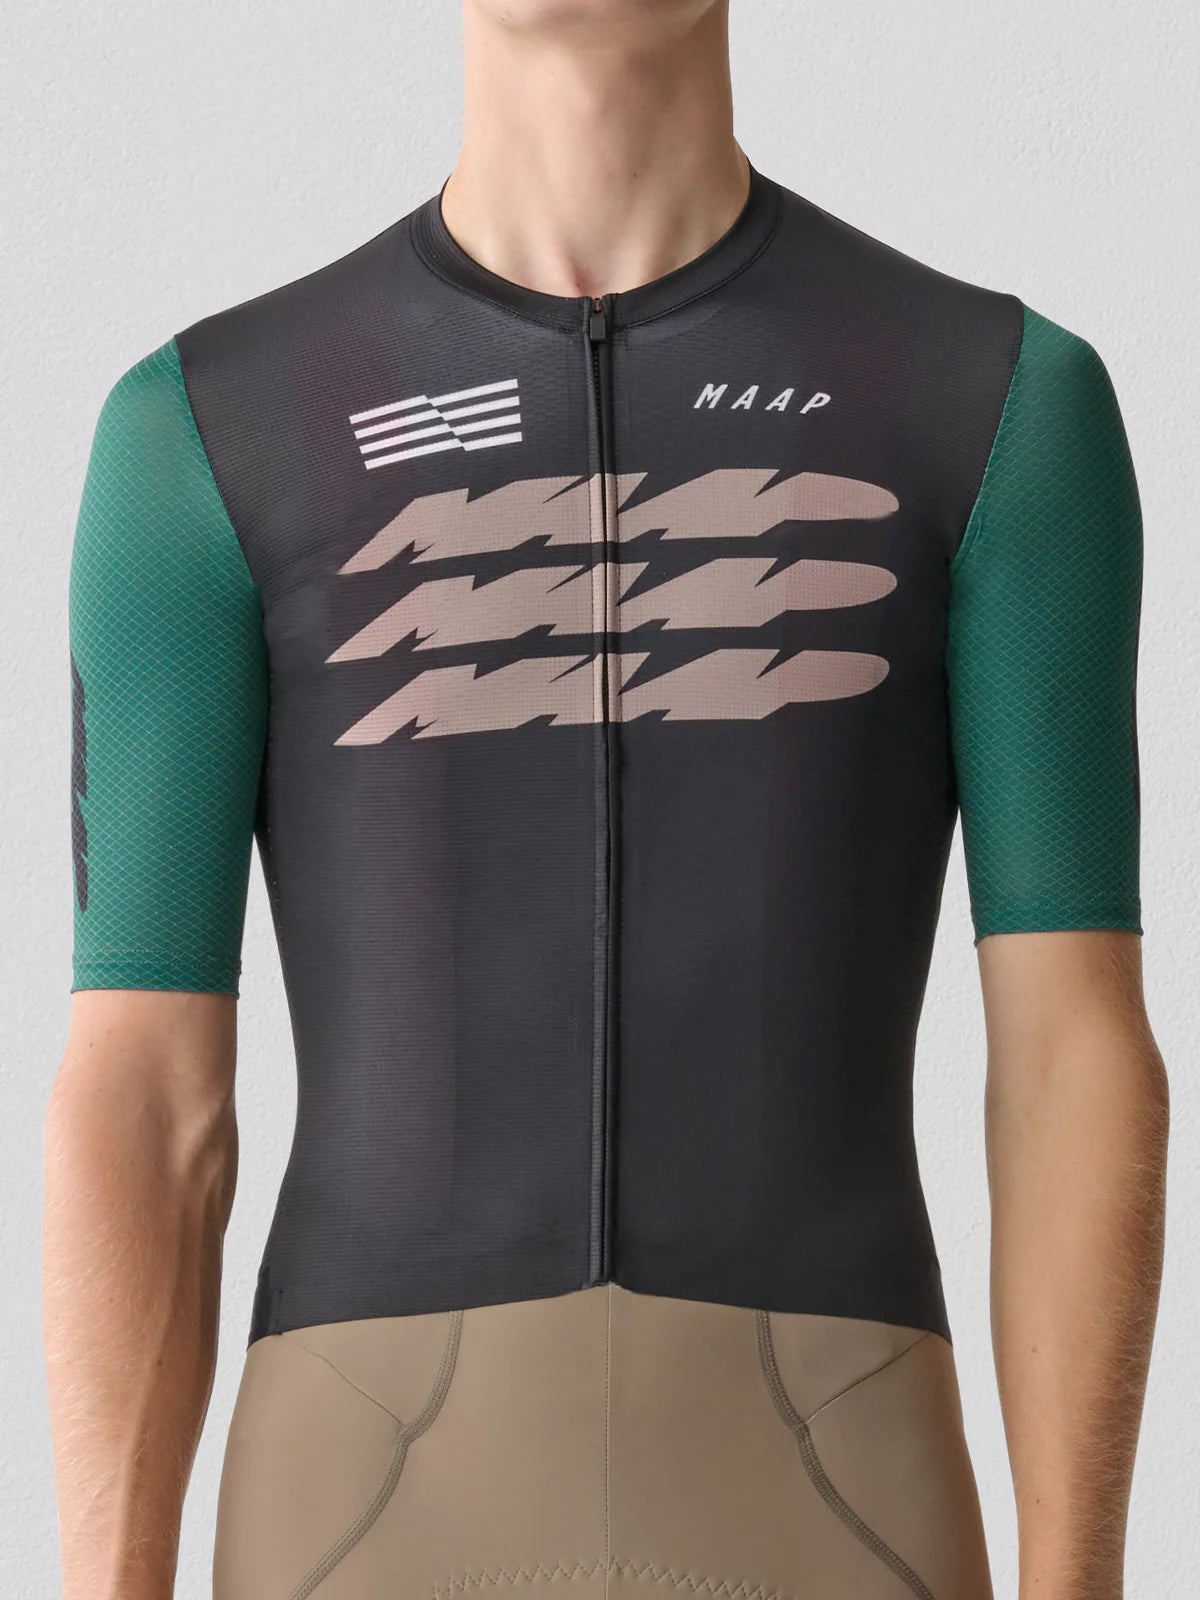 Eclipse Pro Air Jersey 2.0 - Black/Abyss - MAAP